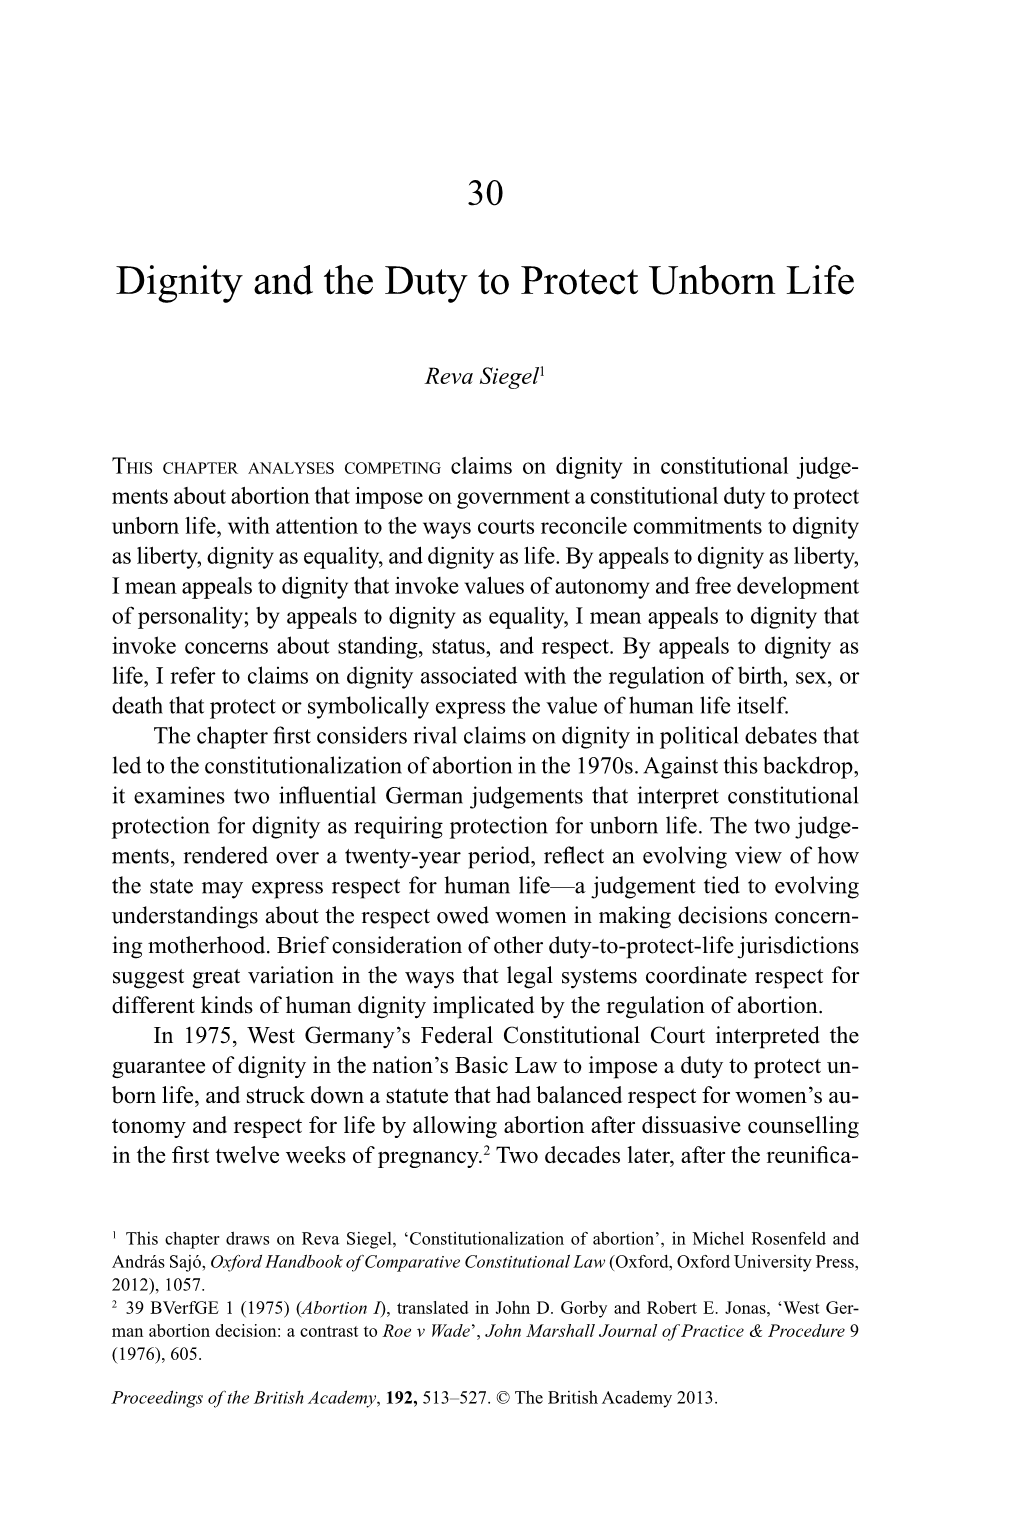 Dignity and the Duty to Protect Unborn Life